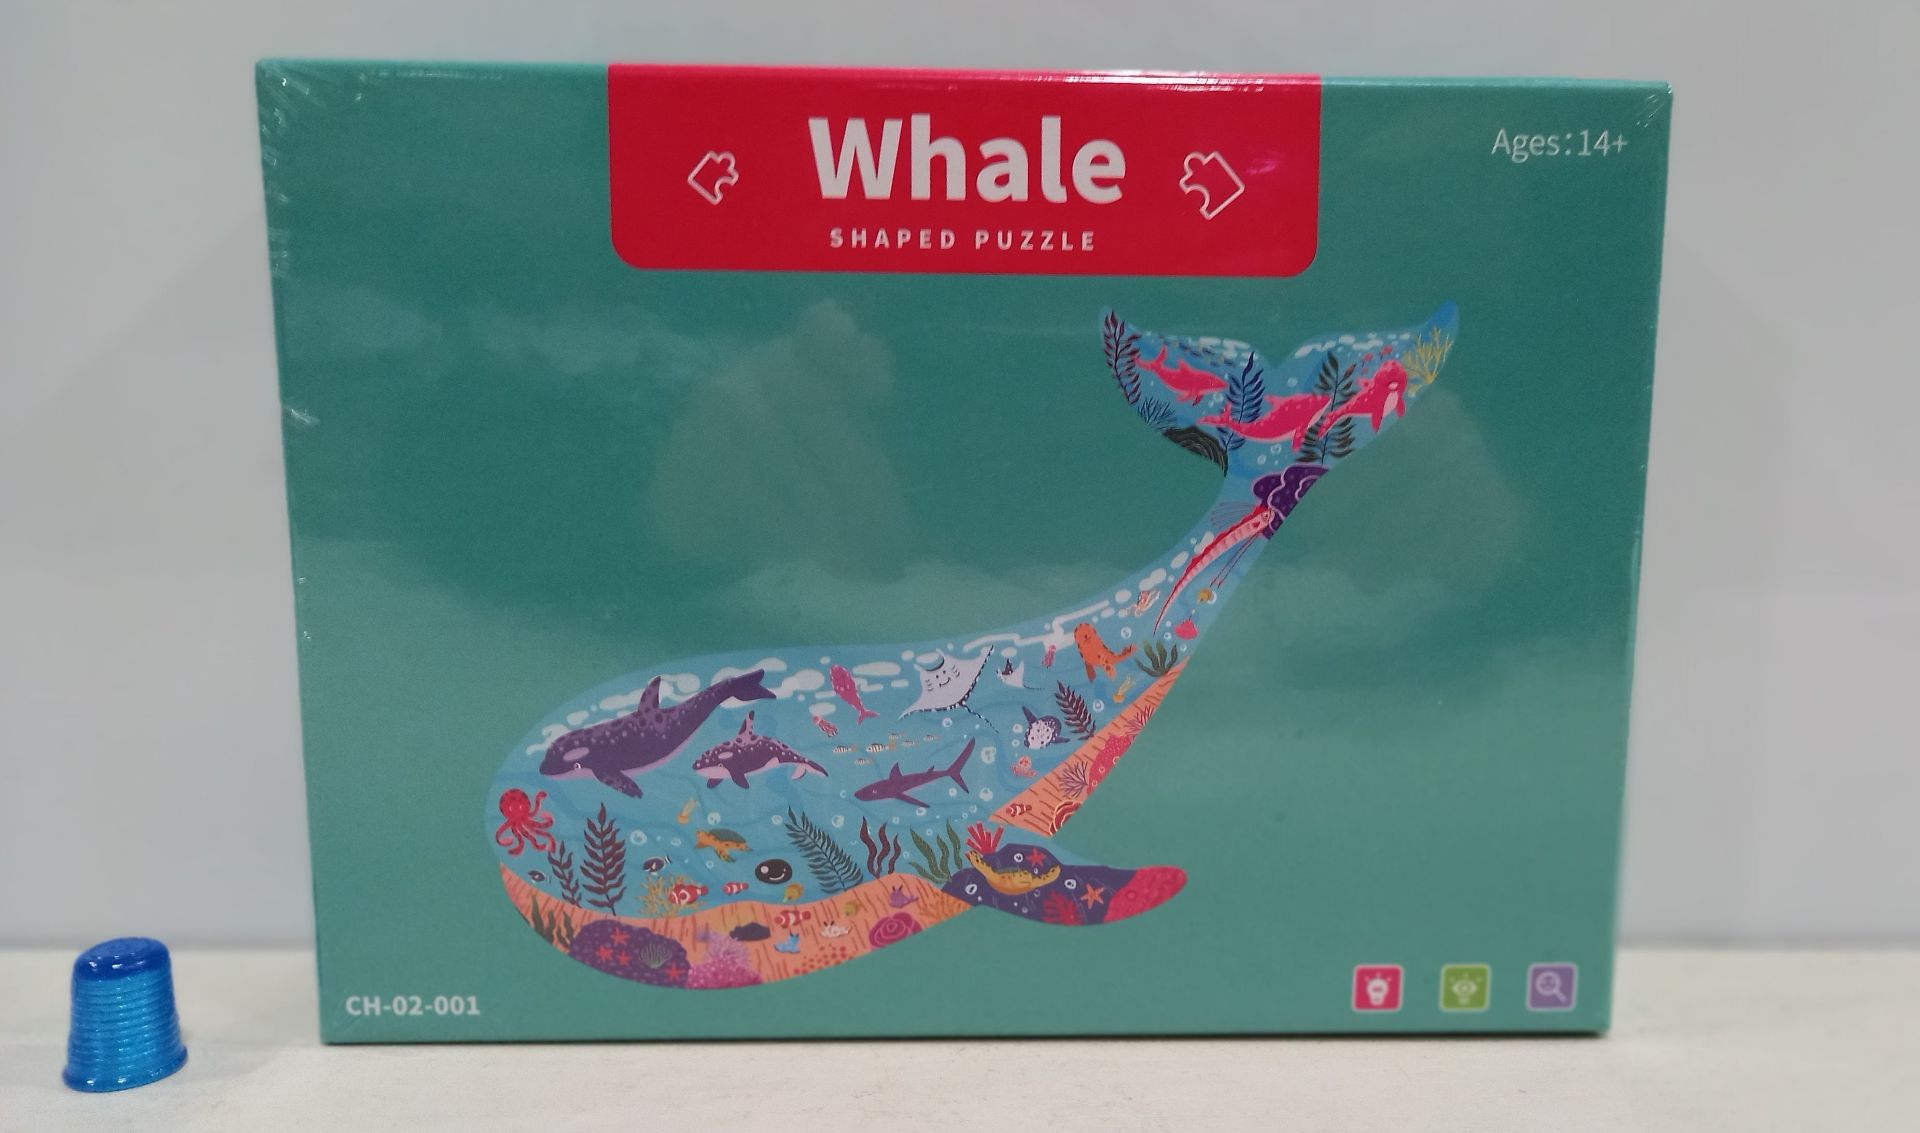 32 X BRAND NEW 1000 PC JIGSAW SETS - WHALE SHAPED DESIGN - IN ONE OUTER CARTON